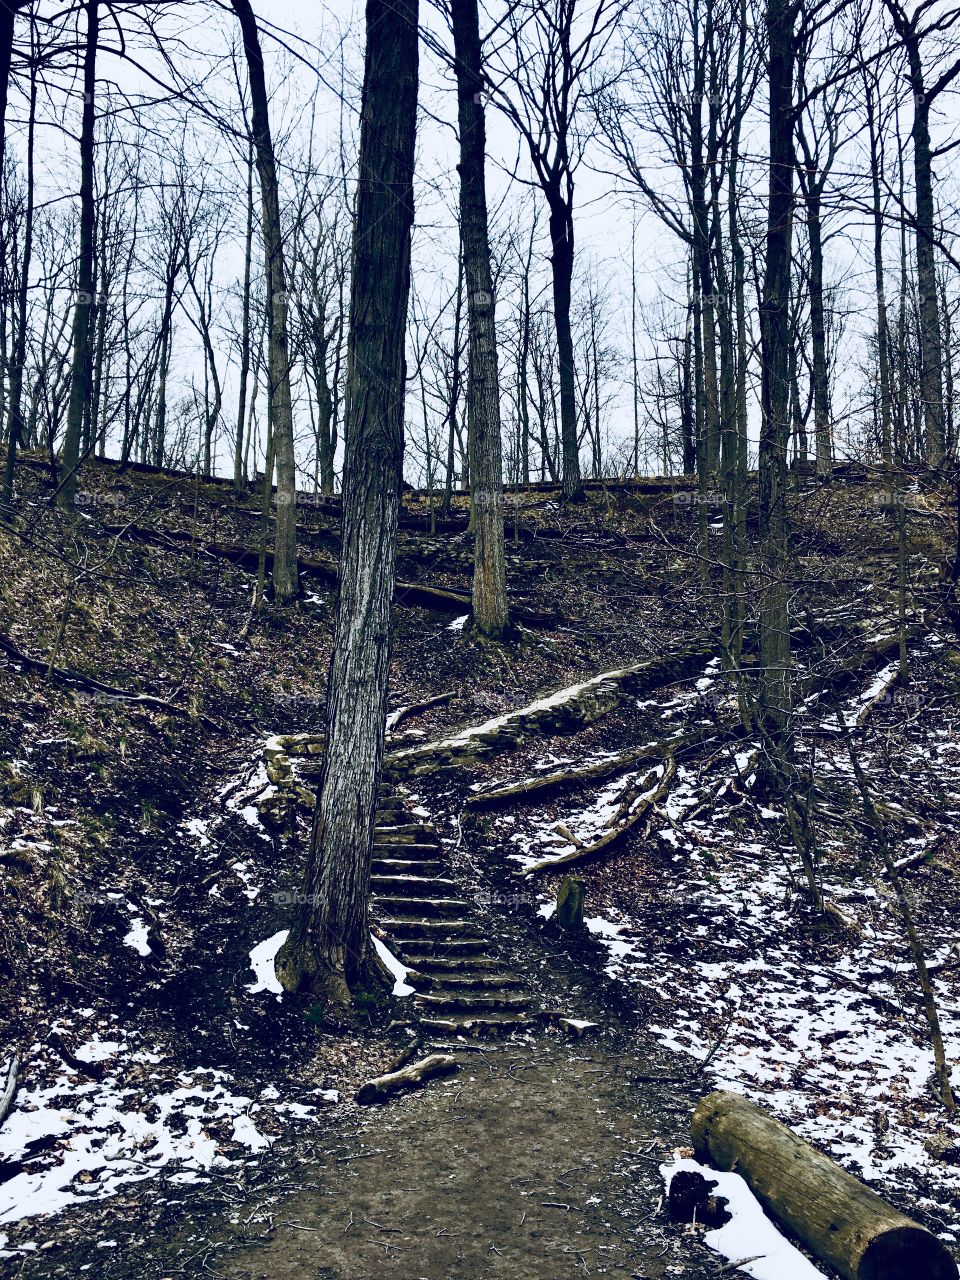 Staircase in forest scene, forest photography, wildlife, environment, nature, wilderness, winter 